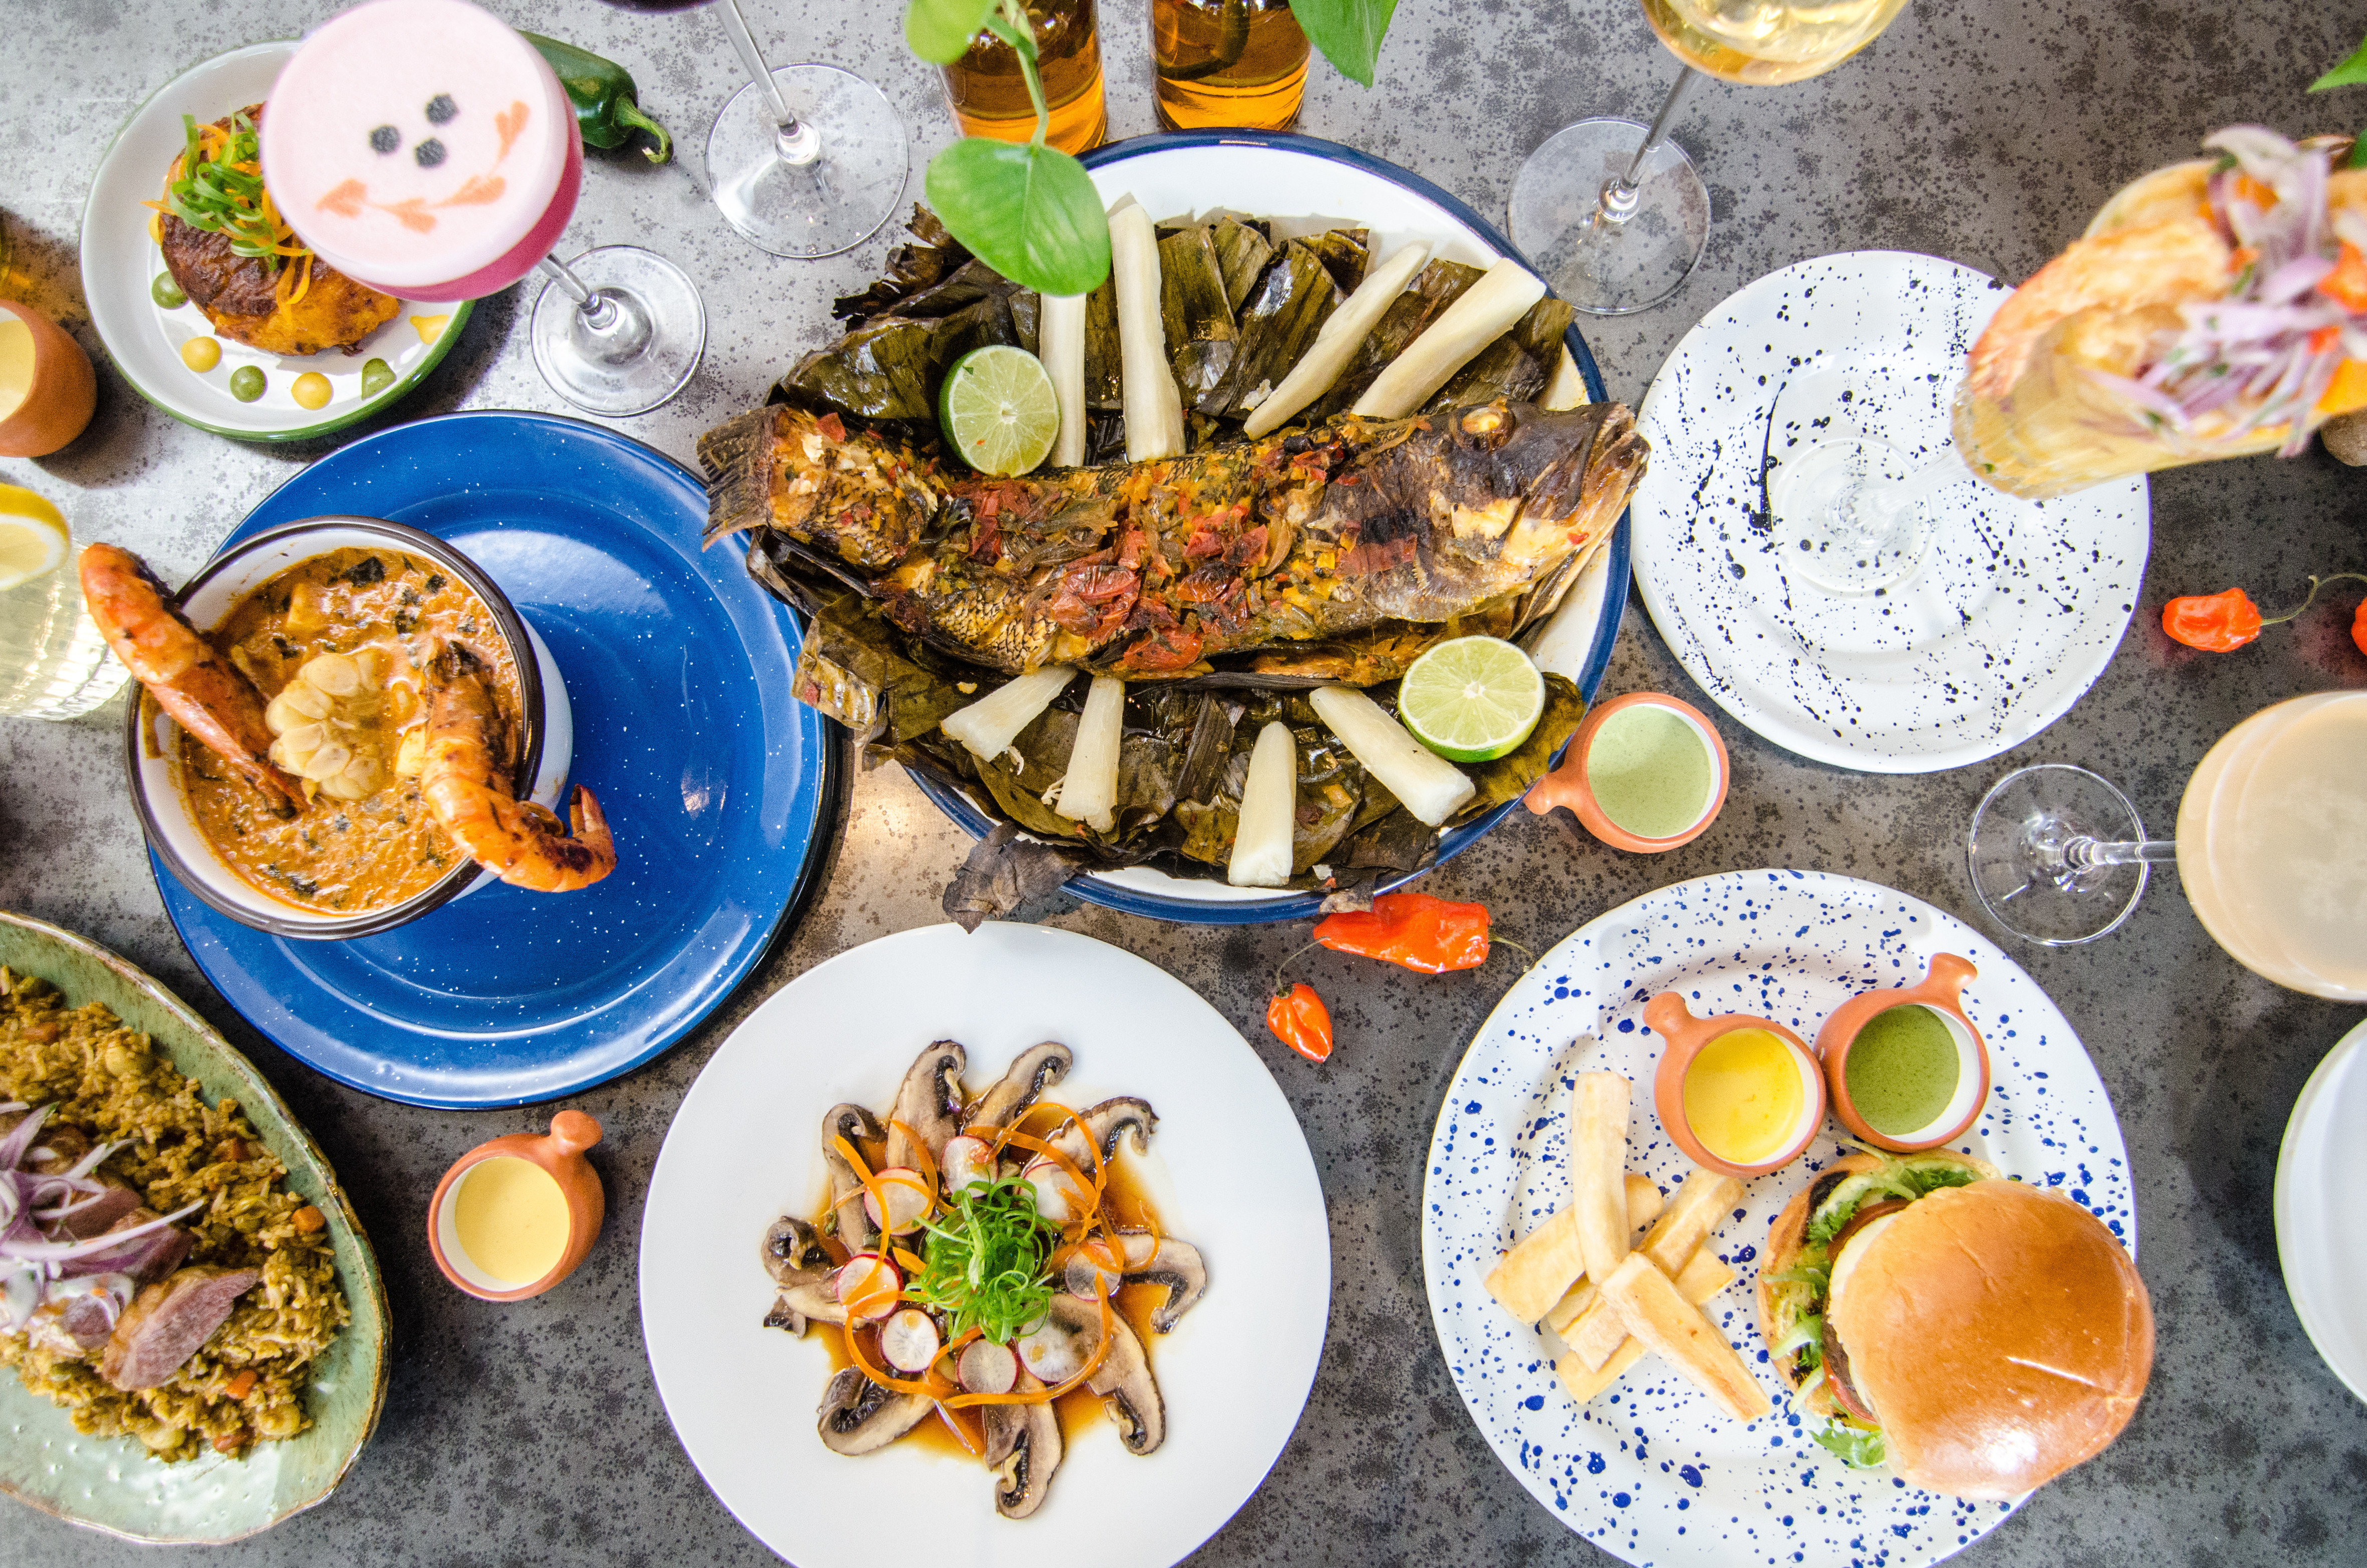 Overhead view of an array of colorful dishes on a metallic table surface, including a whole grilled and steamed fish, a burger, two giant prawns coming out of a bisque, and more.